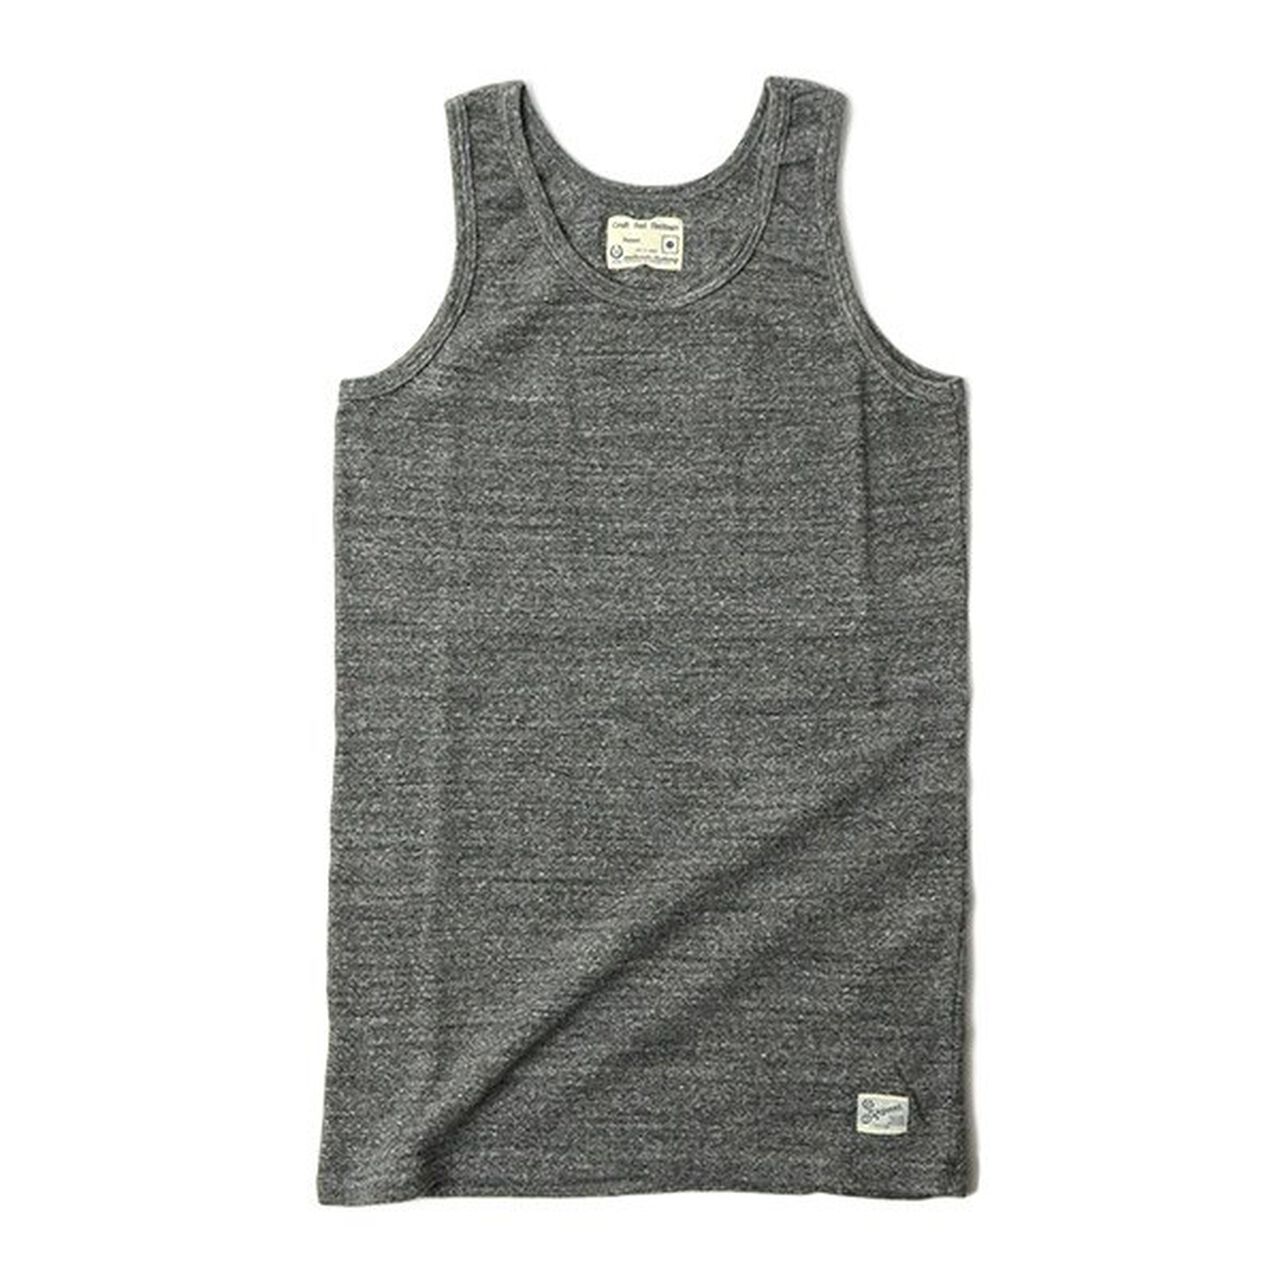 Raffy stretch milling tank top,Grey, large image number 0